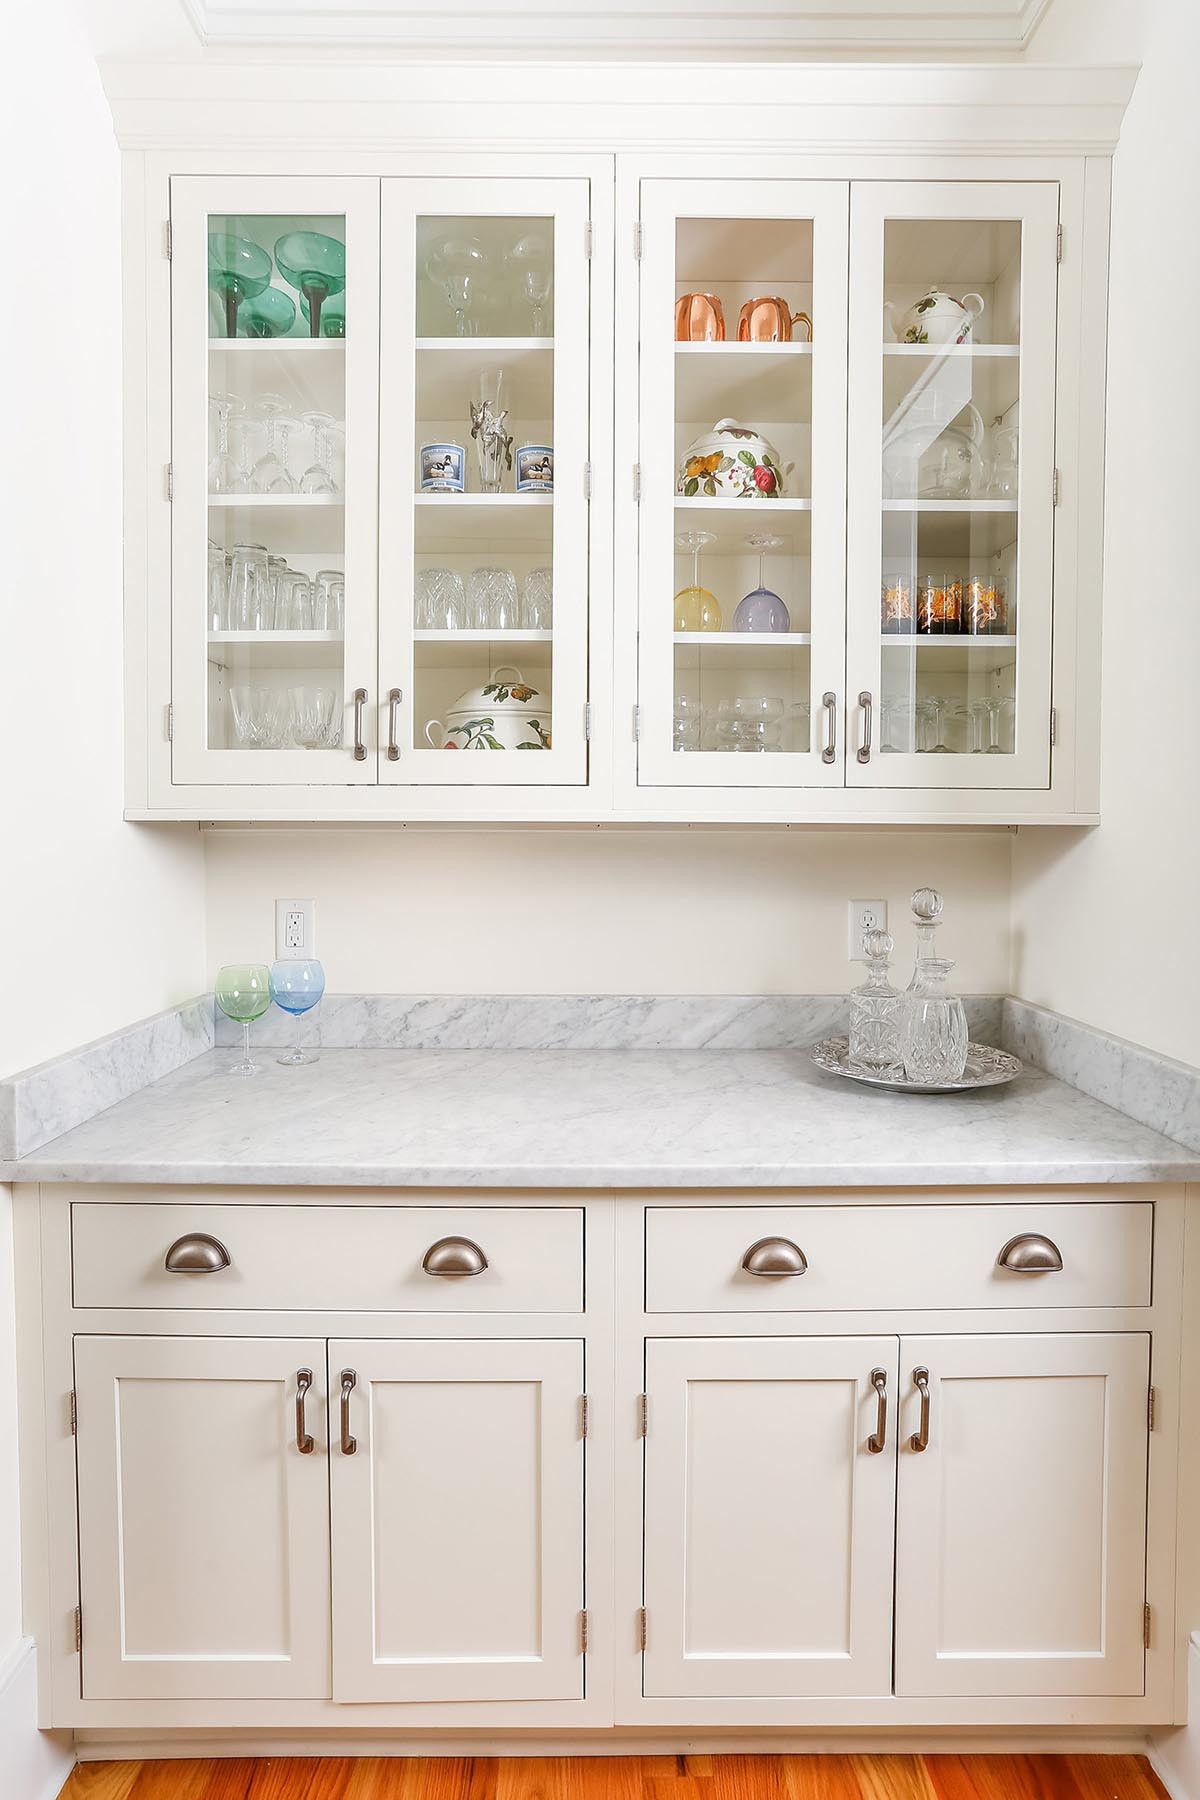 White Pantry Cabinets For Kitchen
 Luxury South Carolina Home features Inset Shaker Cabinets